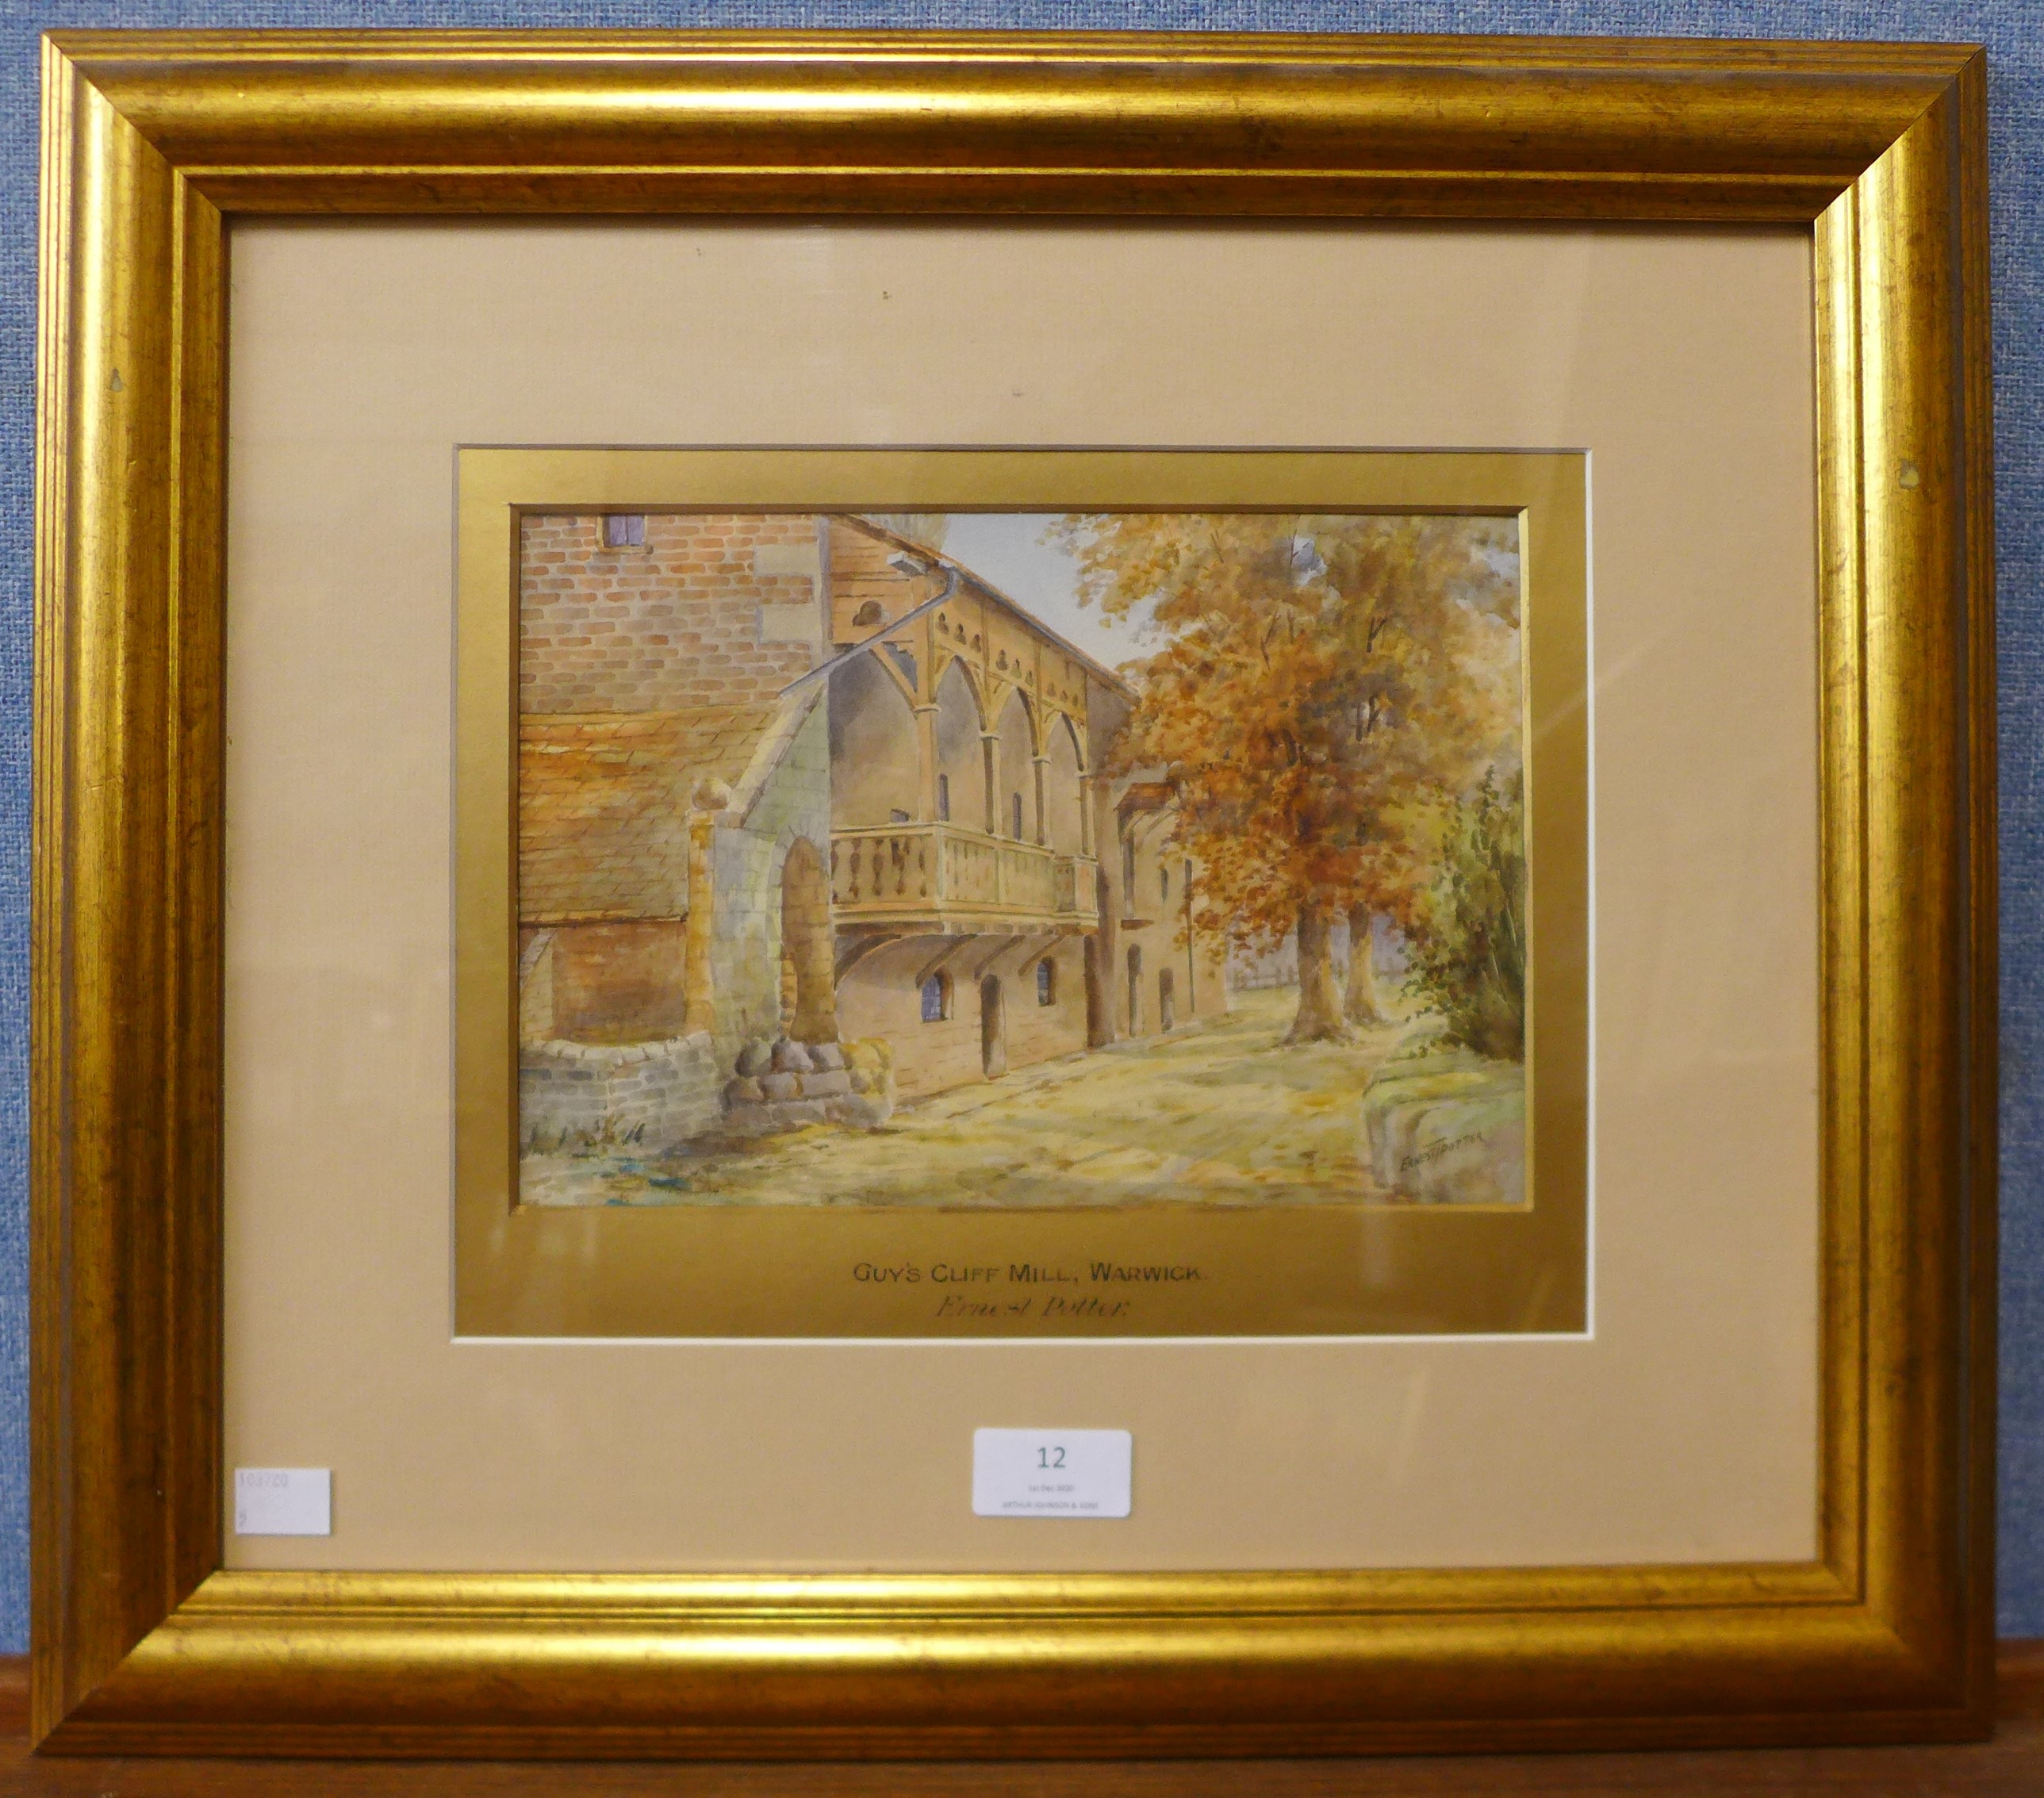 Ernest Potter, Guy's Cliff Mill, Warwick, watercolour, 17 x 25cms, framed - Image 2 of 4